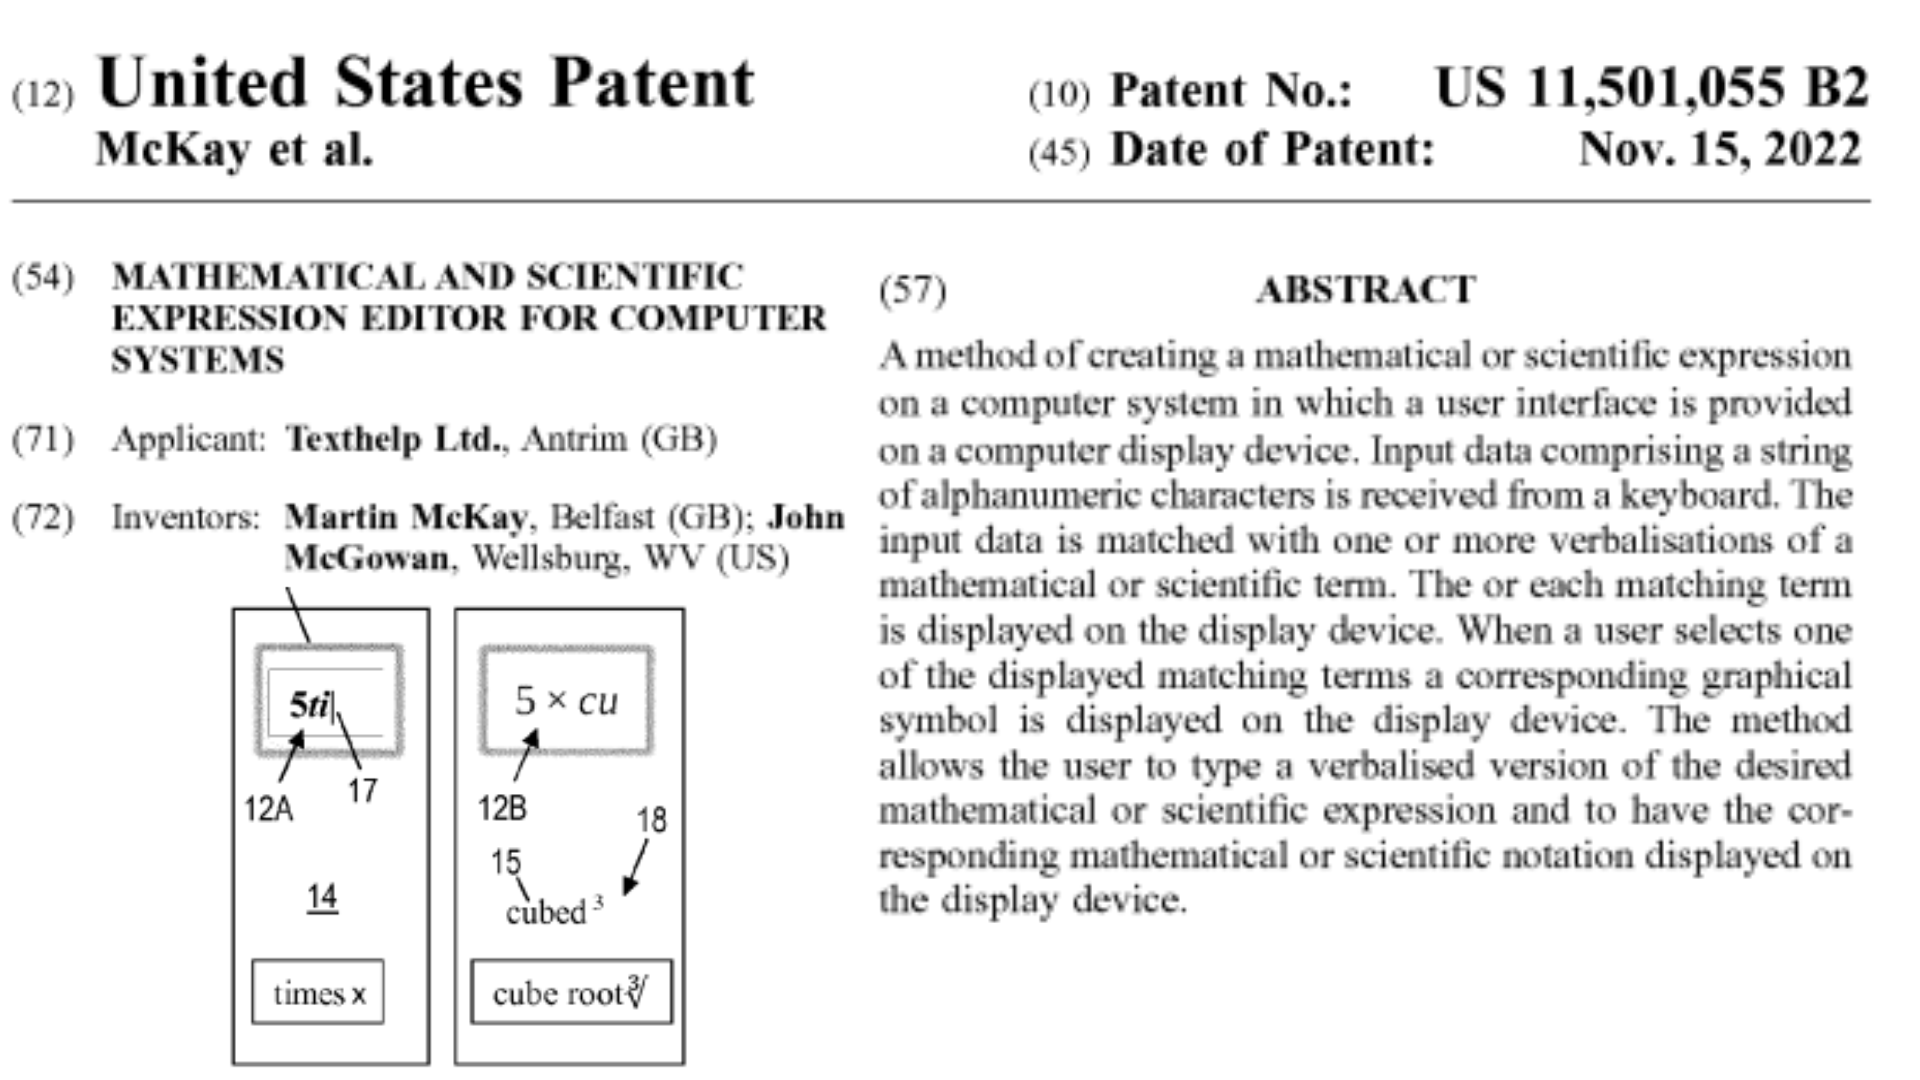 Image of the patent held by John McGowan and Martin McKay